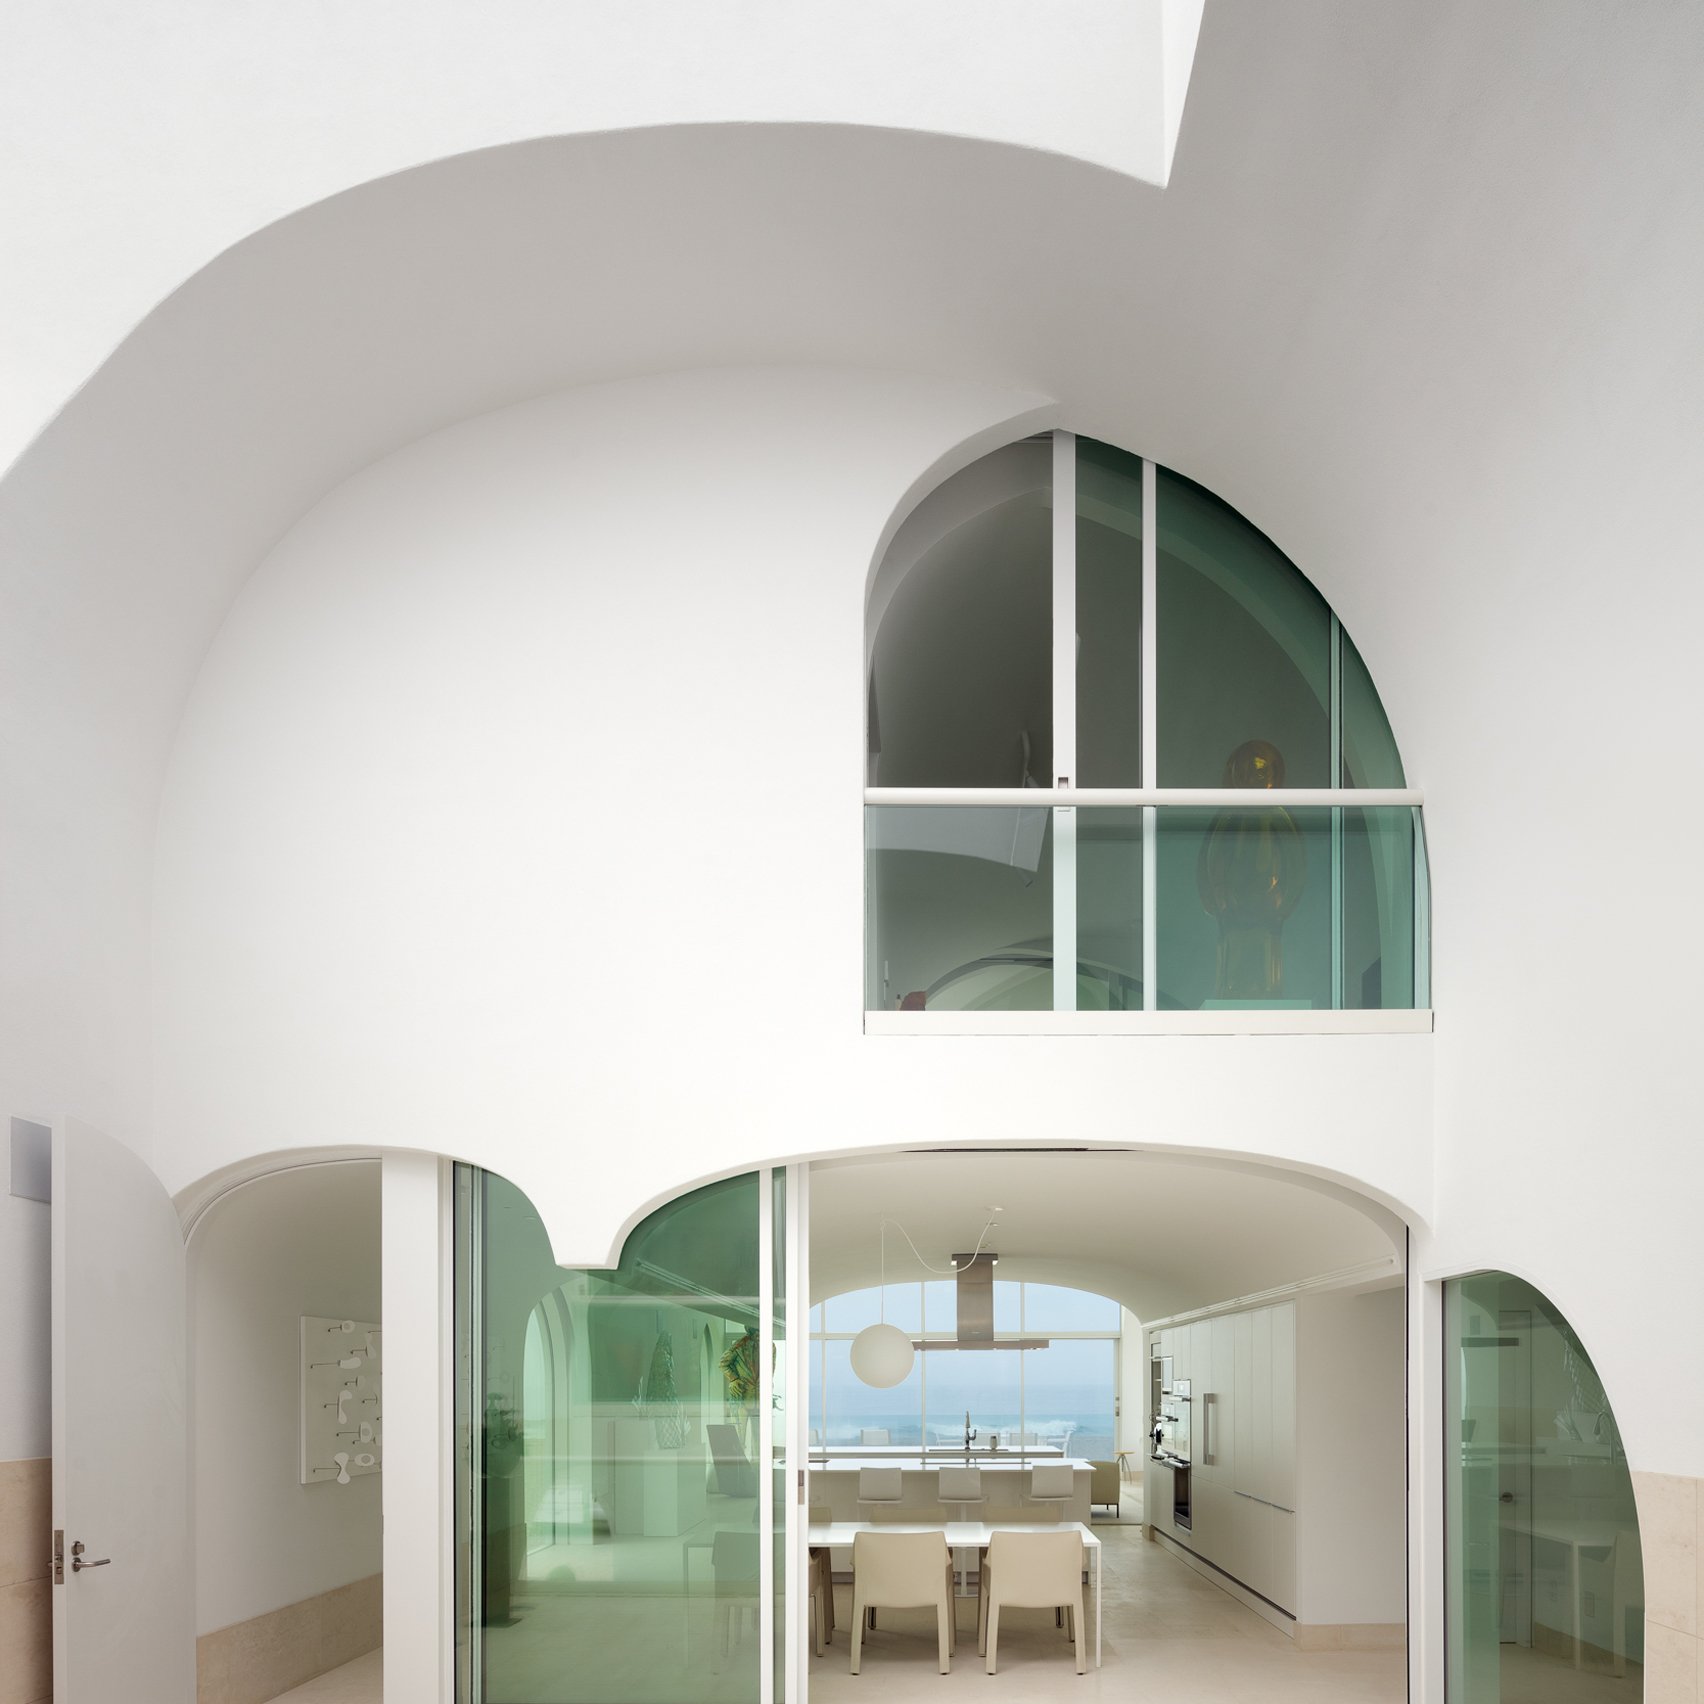 10 contemporary homes that integrate arched doorways, windows and nooks